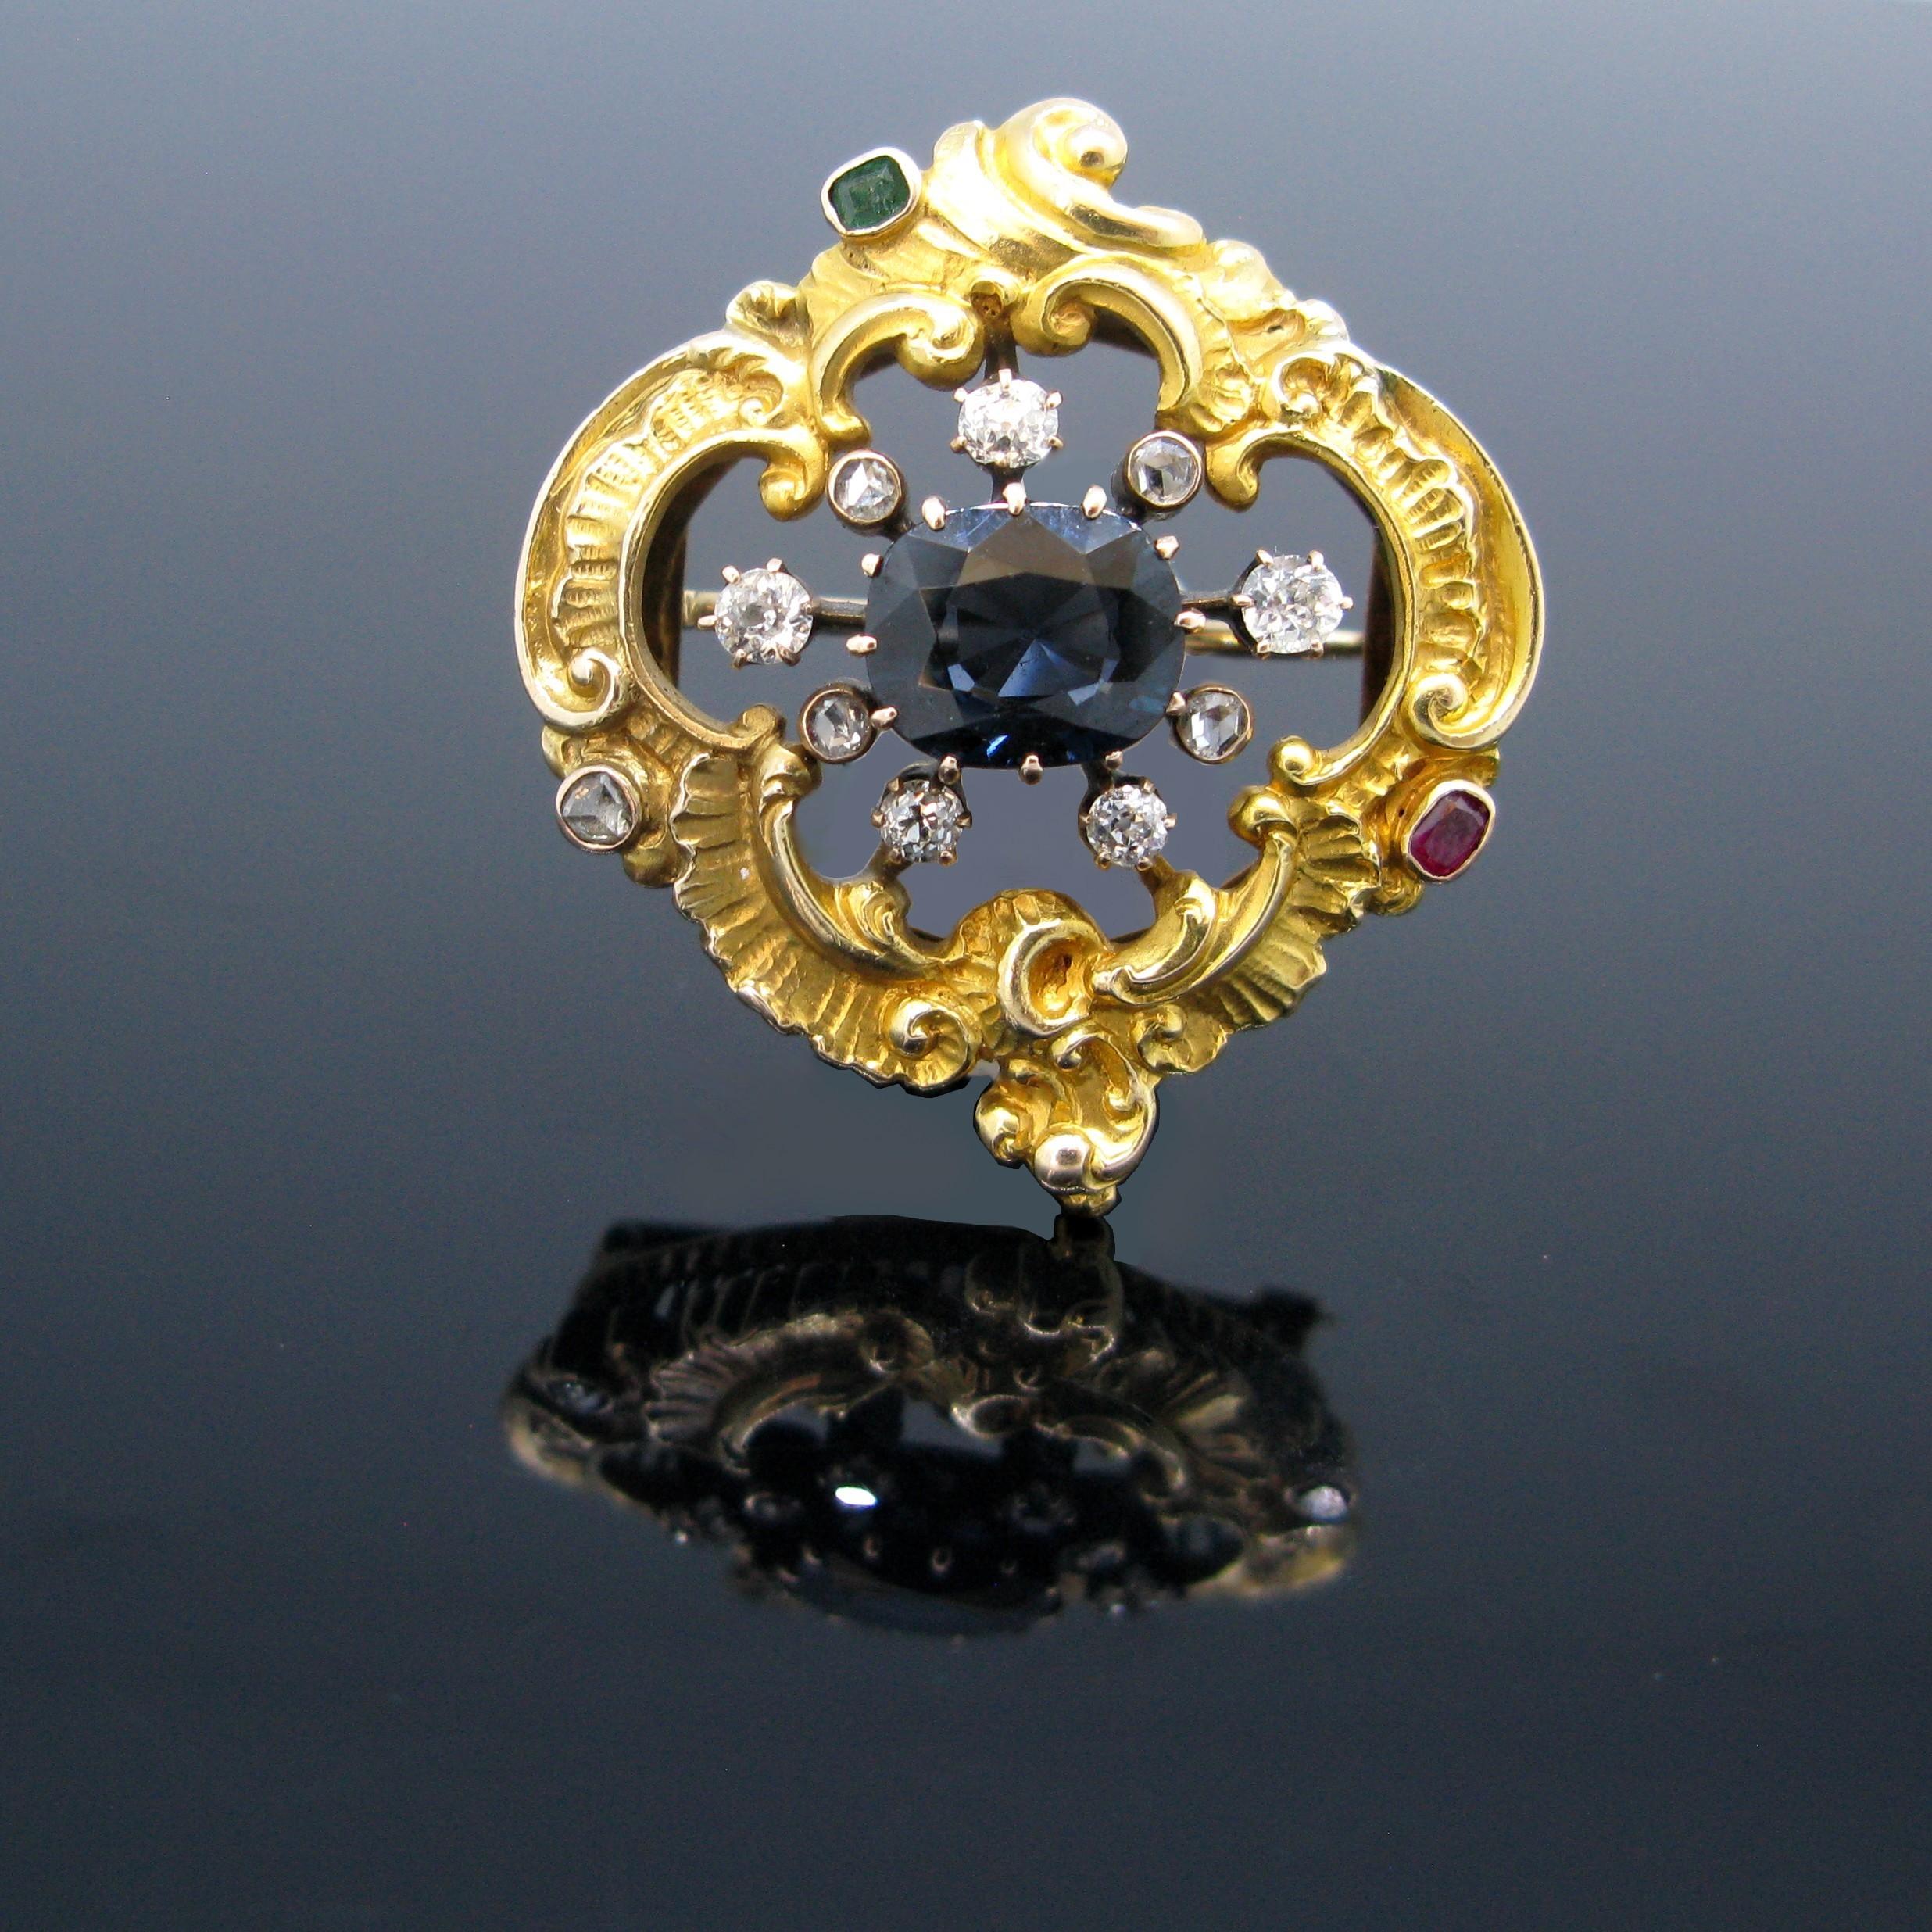 A ravishing brooch from early 19th century set with a blue spinel (2.50ct approximately) in the center and surrounded by 5 old cut diamonds and 5 rose cut diamonds. The top was tested as 18kt gold and the pin at the back was tested as 14kt gold. The